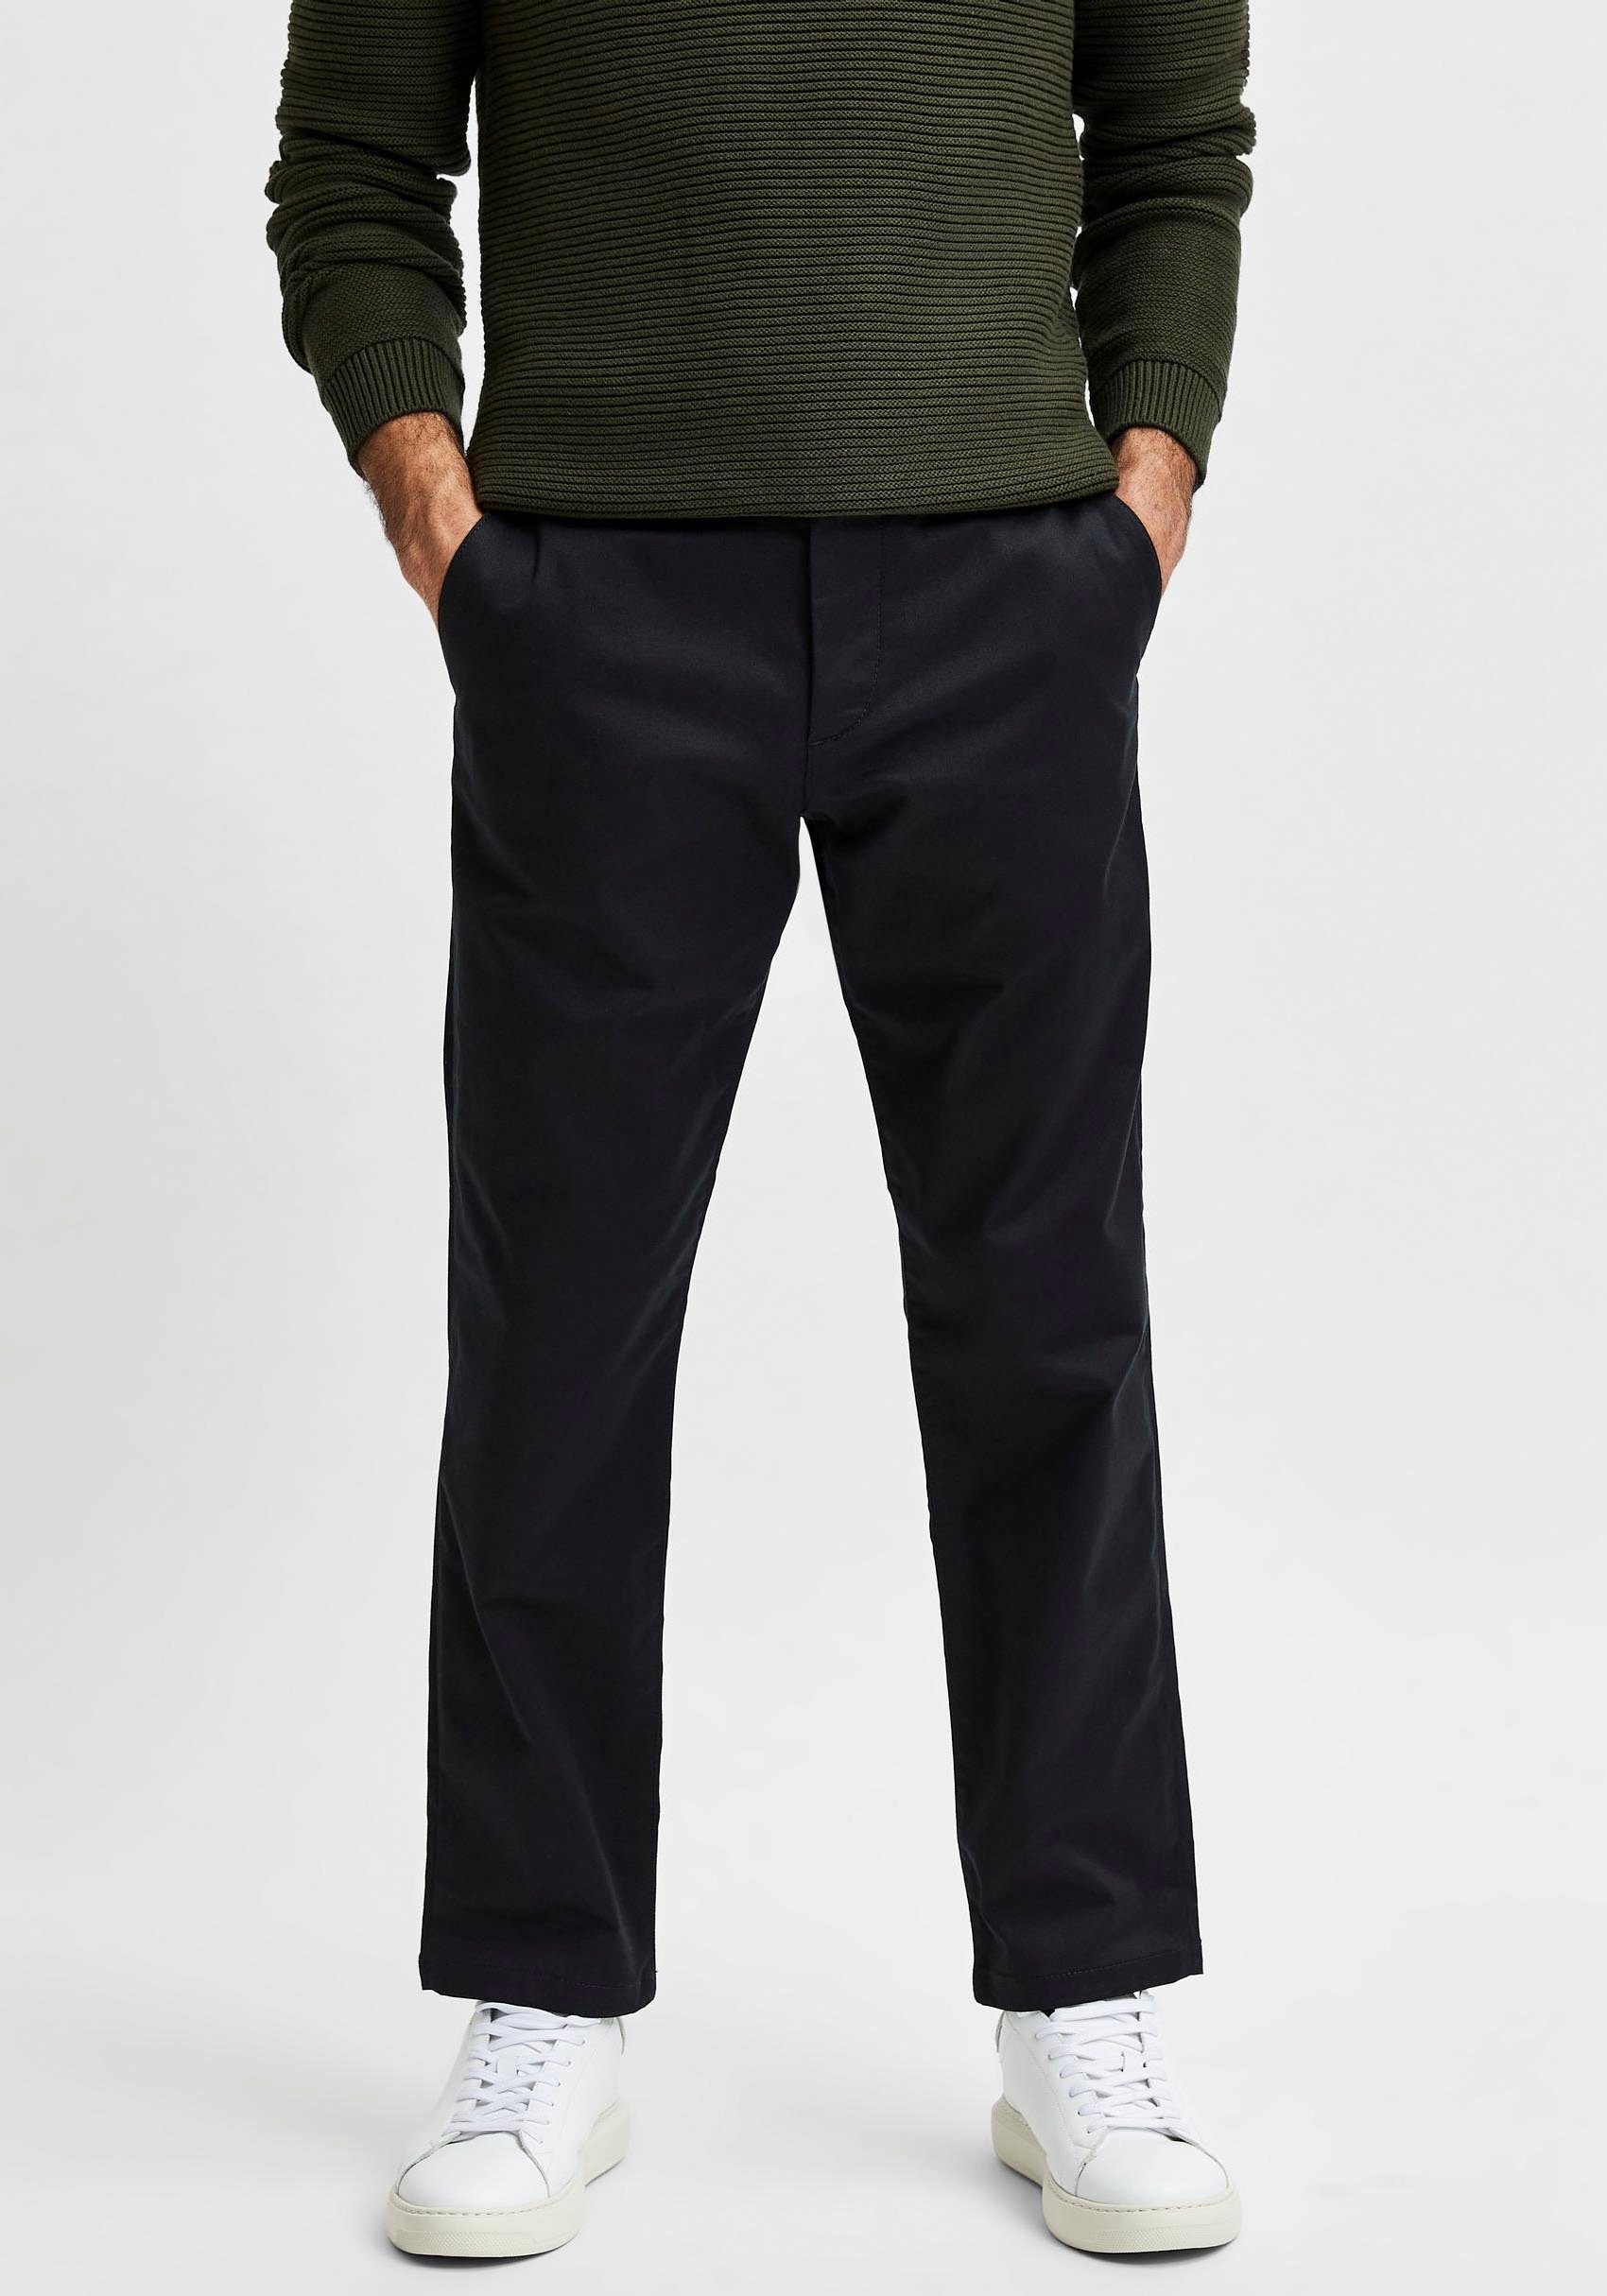 Black SE HOMME SELECTED Chino Chinohose